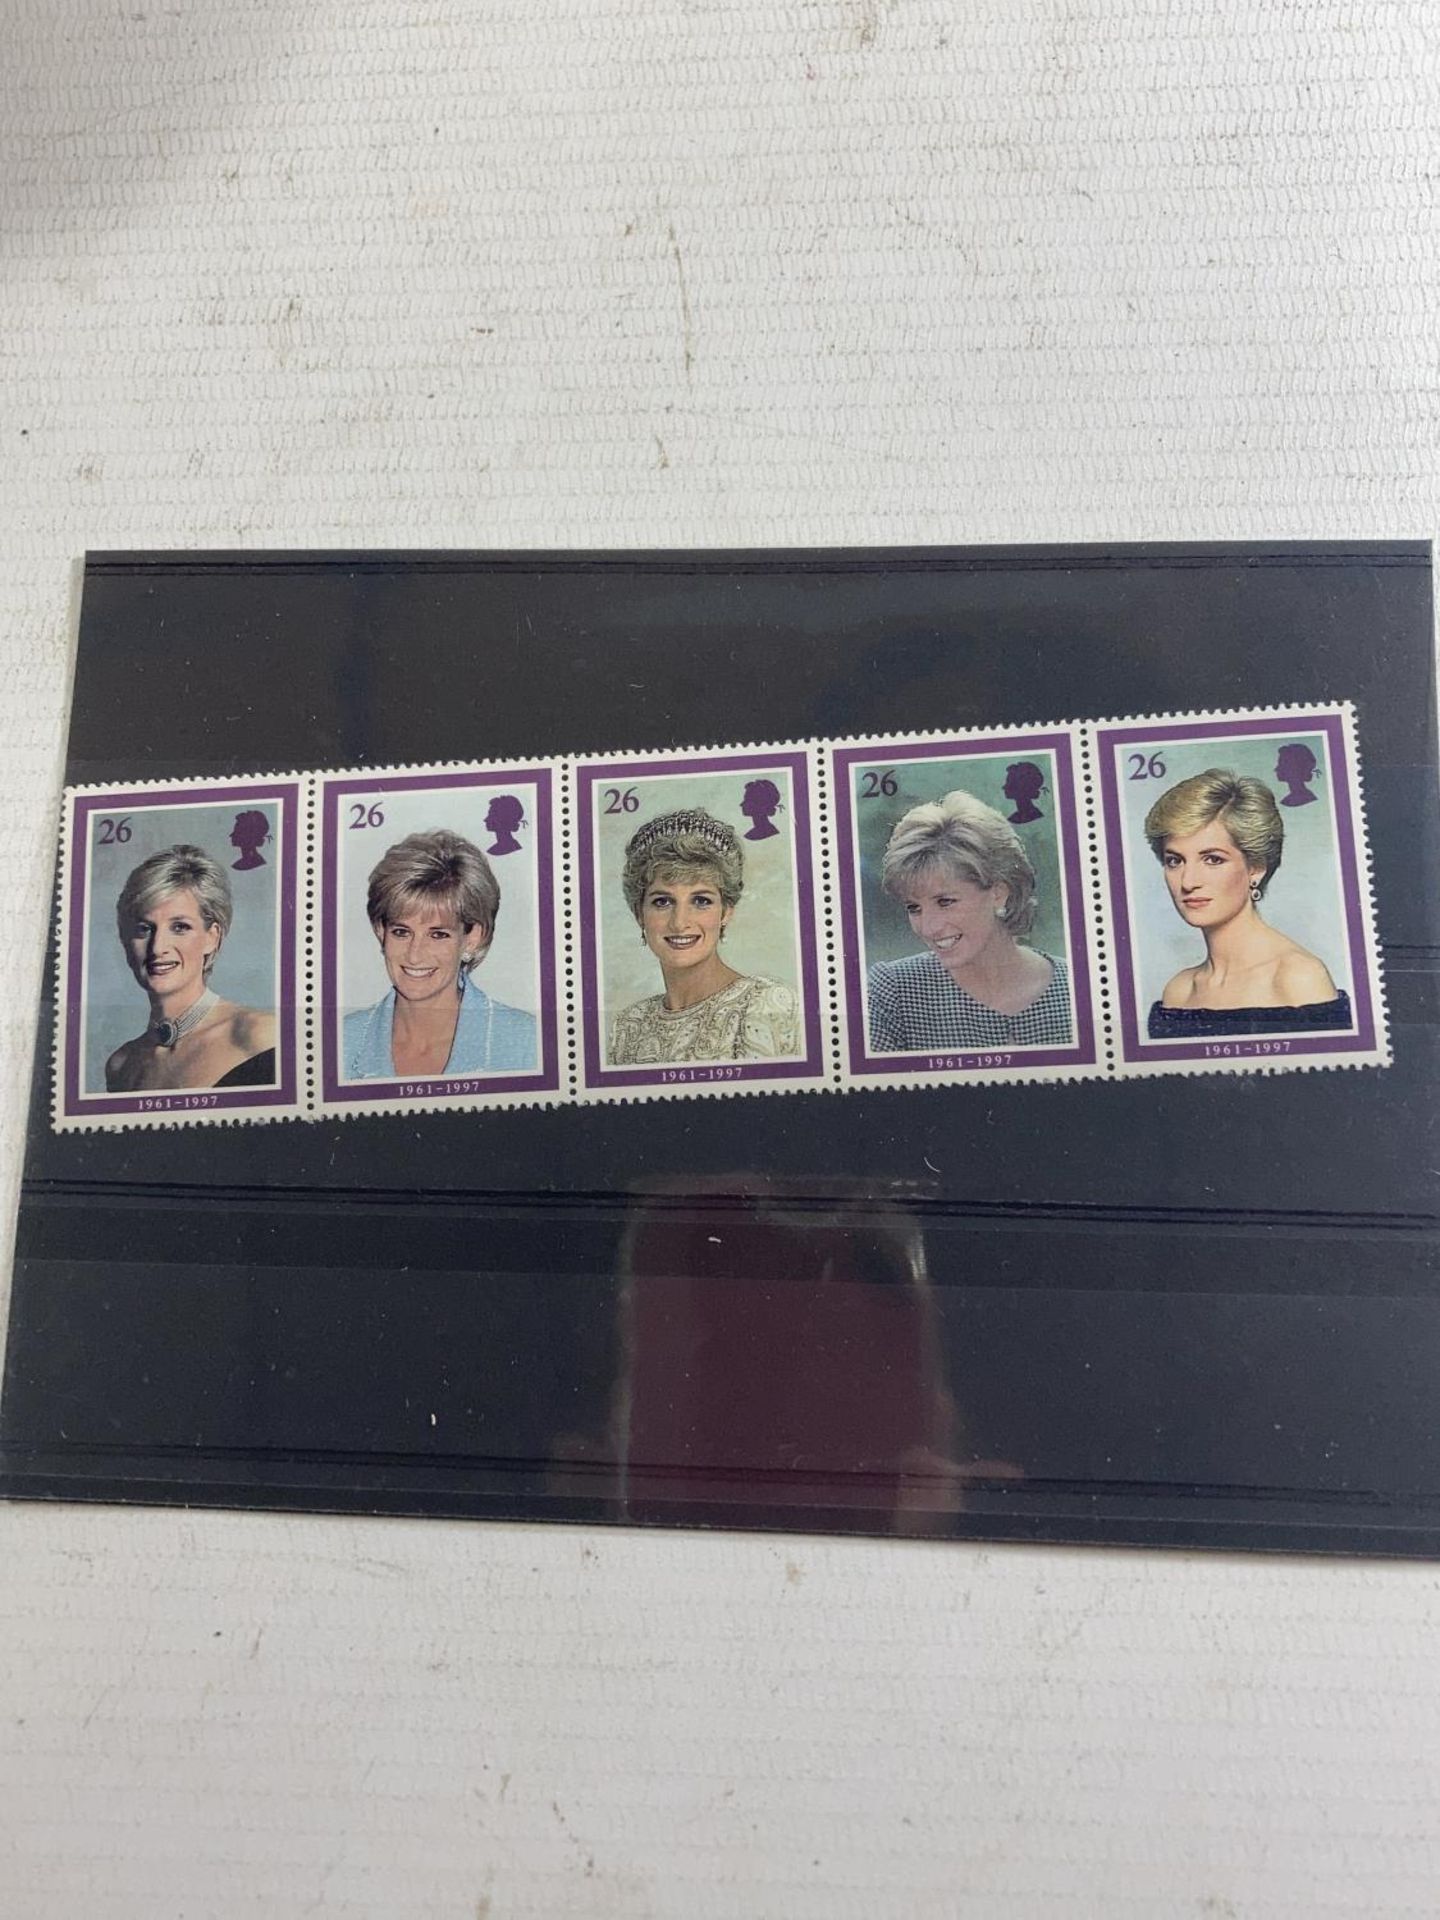 TWO NH MINT STRIPS OF GREAT BRITAIN PRINCESS OF WALES STAMPS TOGETHER WITH A CASED PRINCESS DIANA - Image 3 of 6